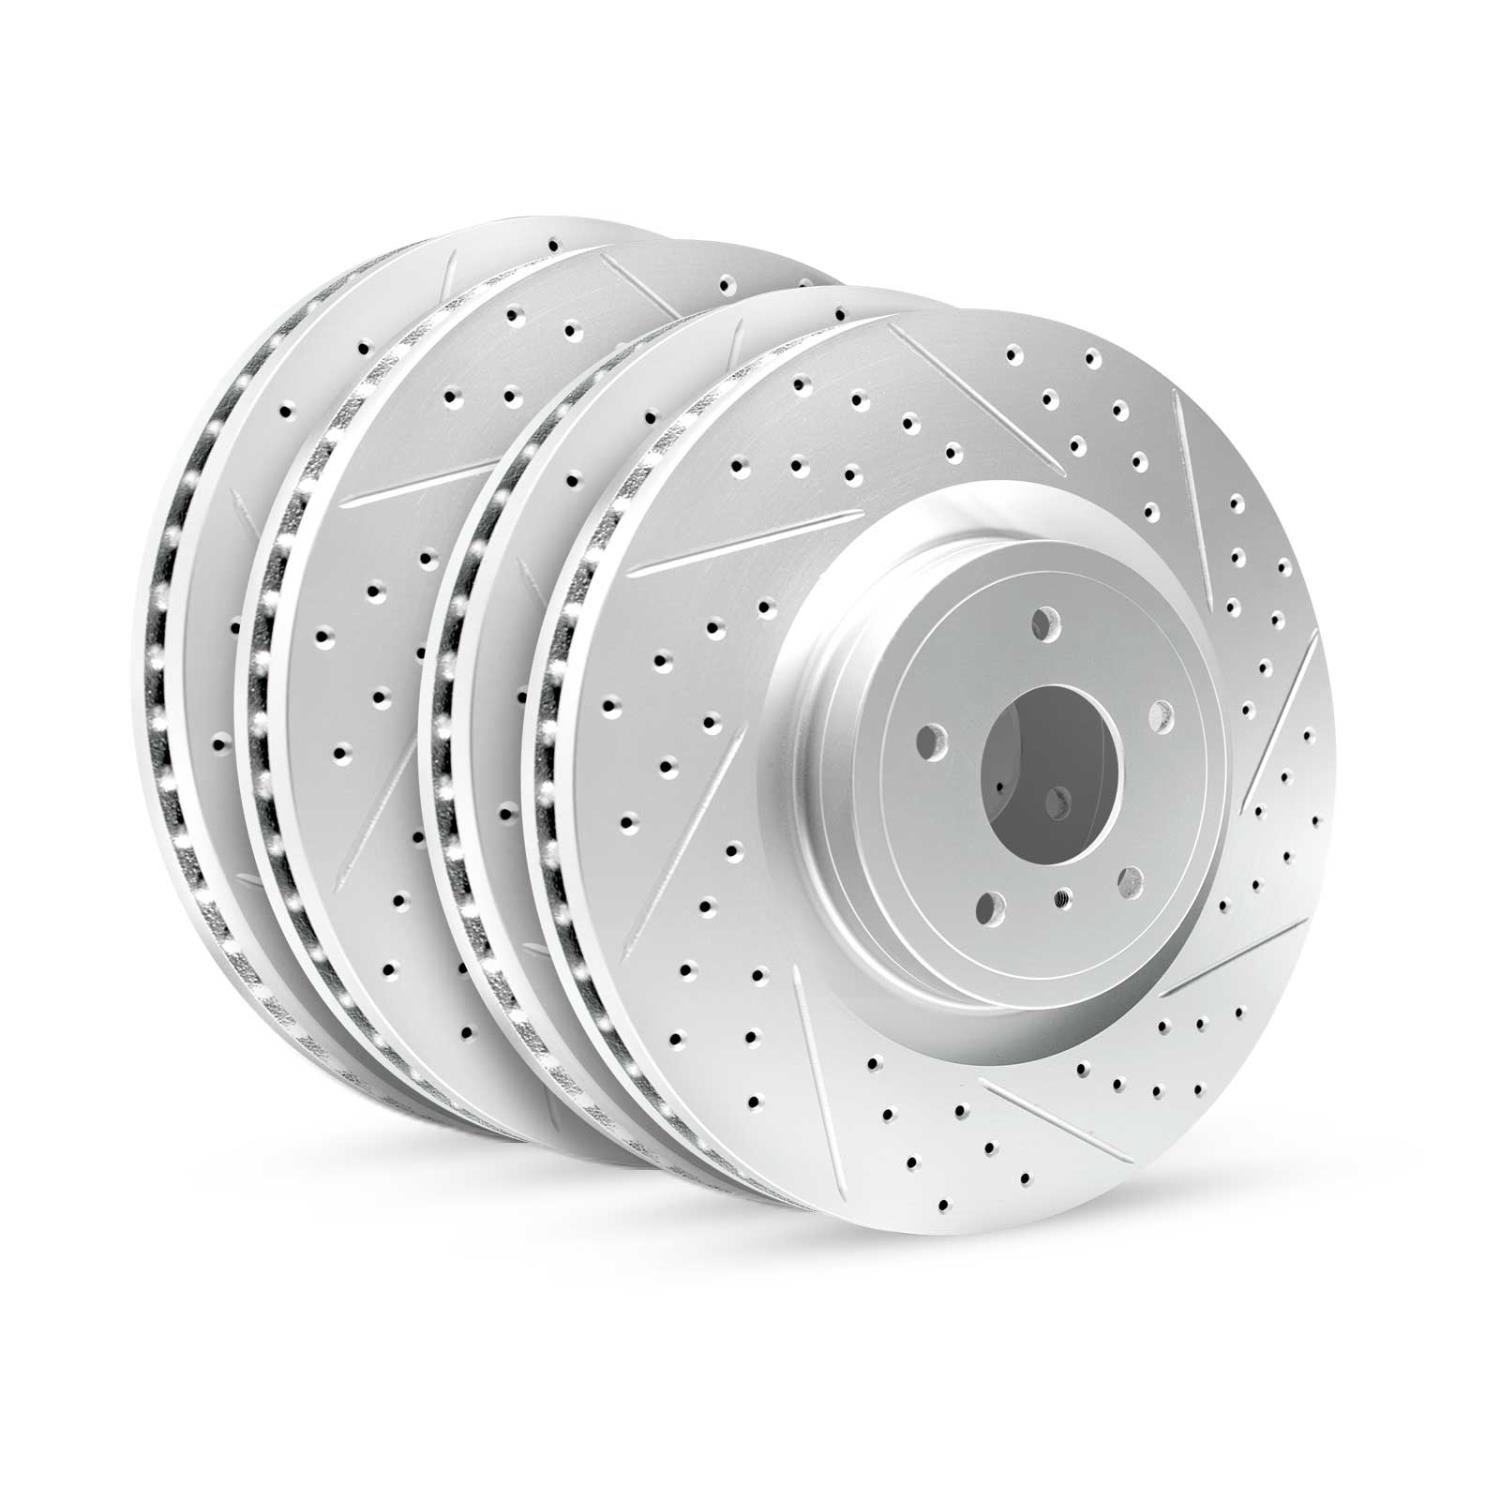 GEO-Carbon Drilled/Slotted Rotors, 2009-2014 Subaru, Position: